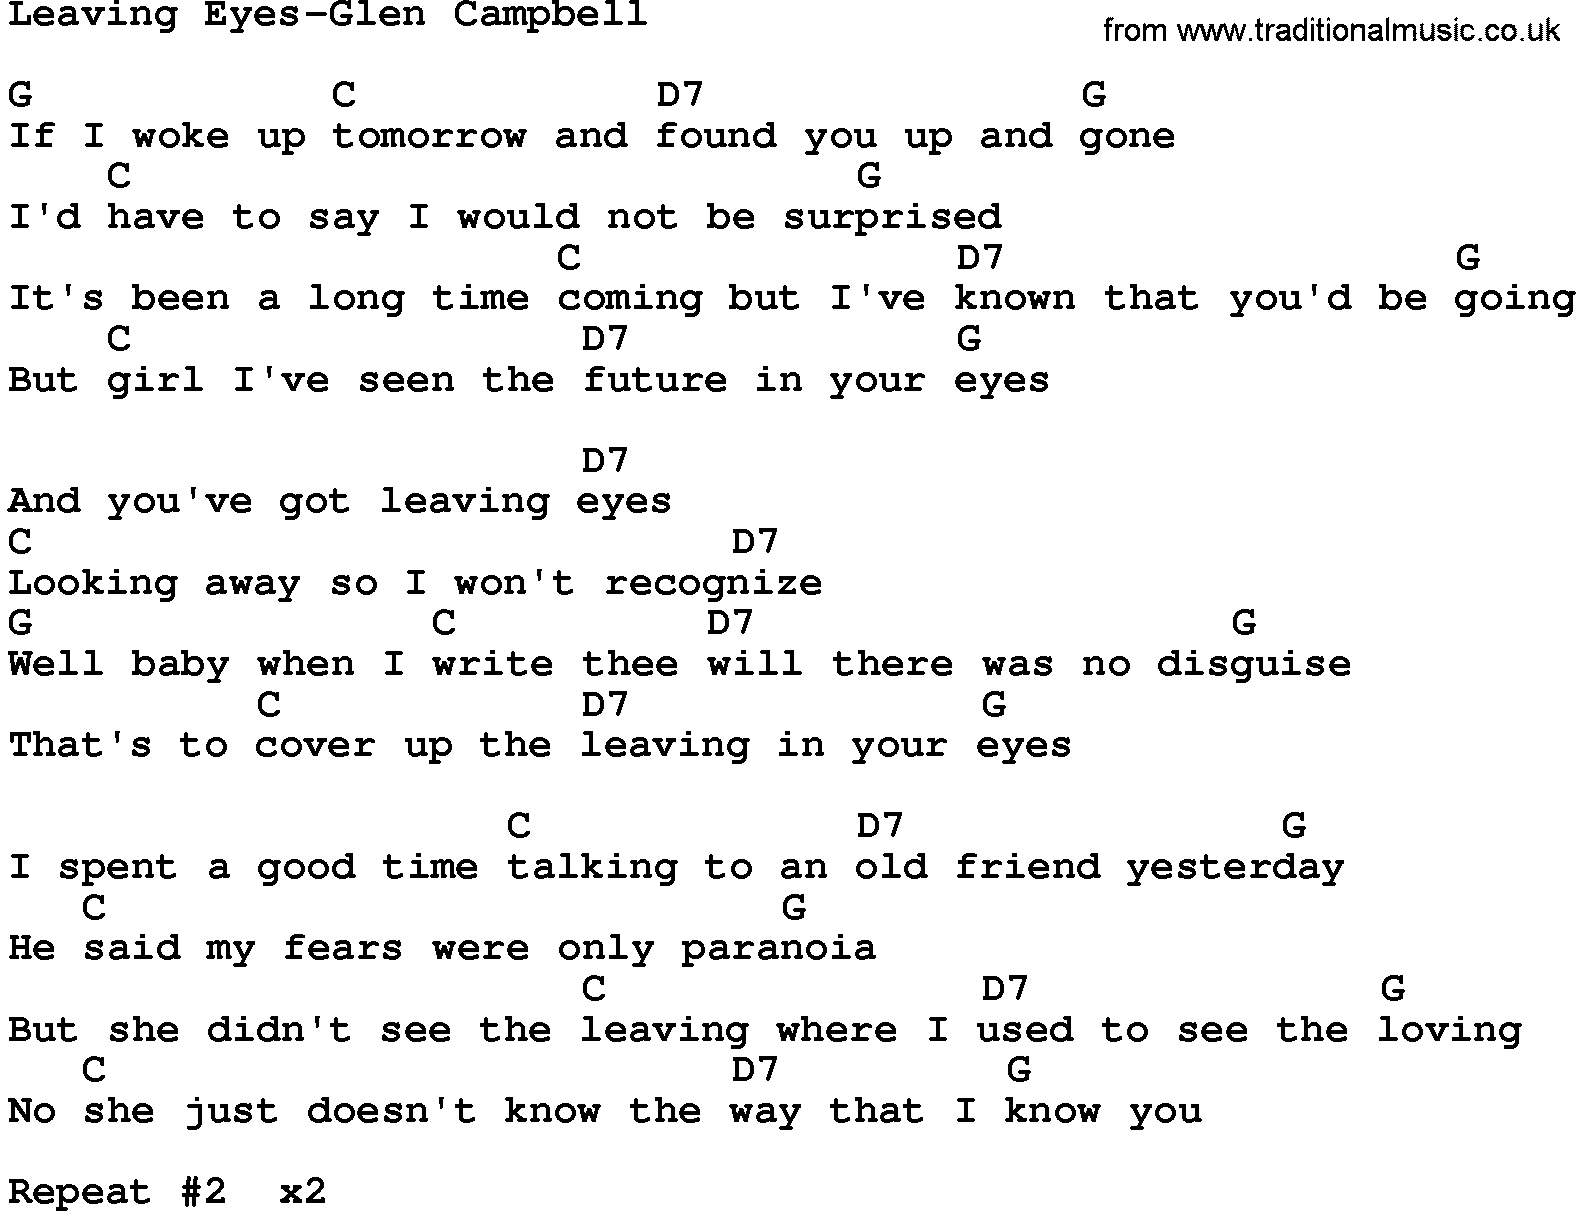 Country music song: Leaving Eyes-Glen Campbell lyrics and chords